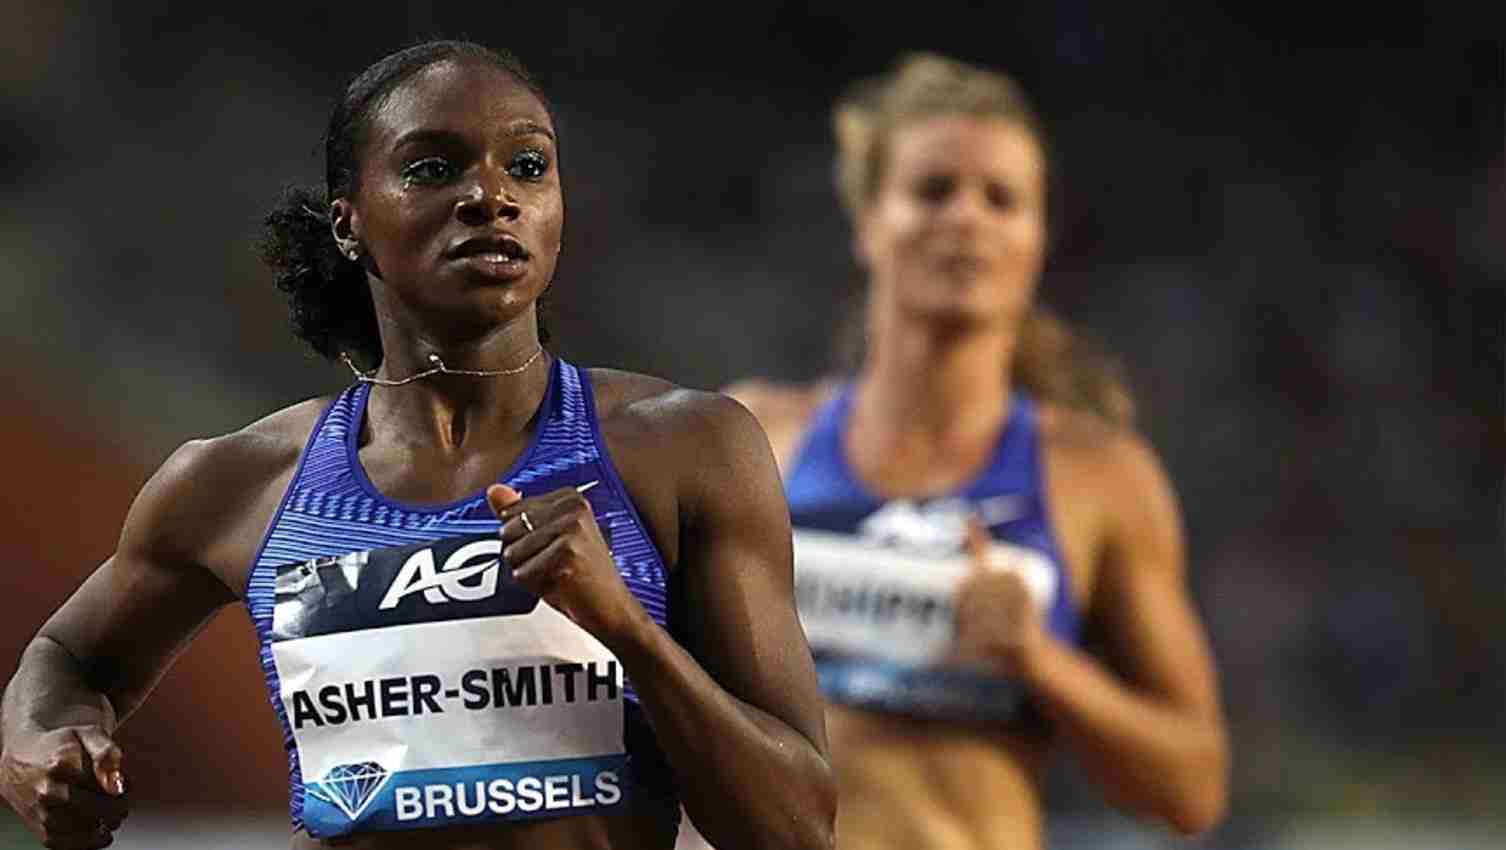 Asher-Smith Flashes To World-Lead and PB To Win Indoor Meeting Karlsruhe 60m